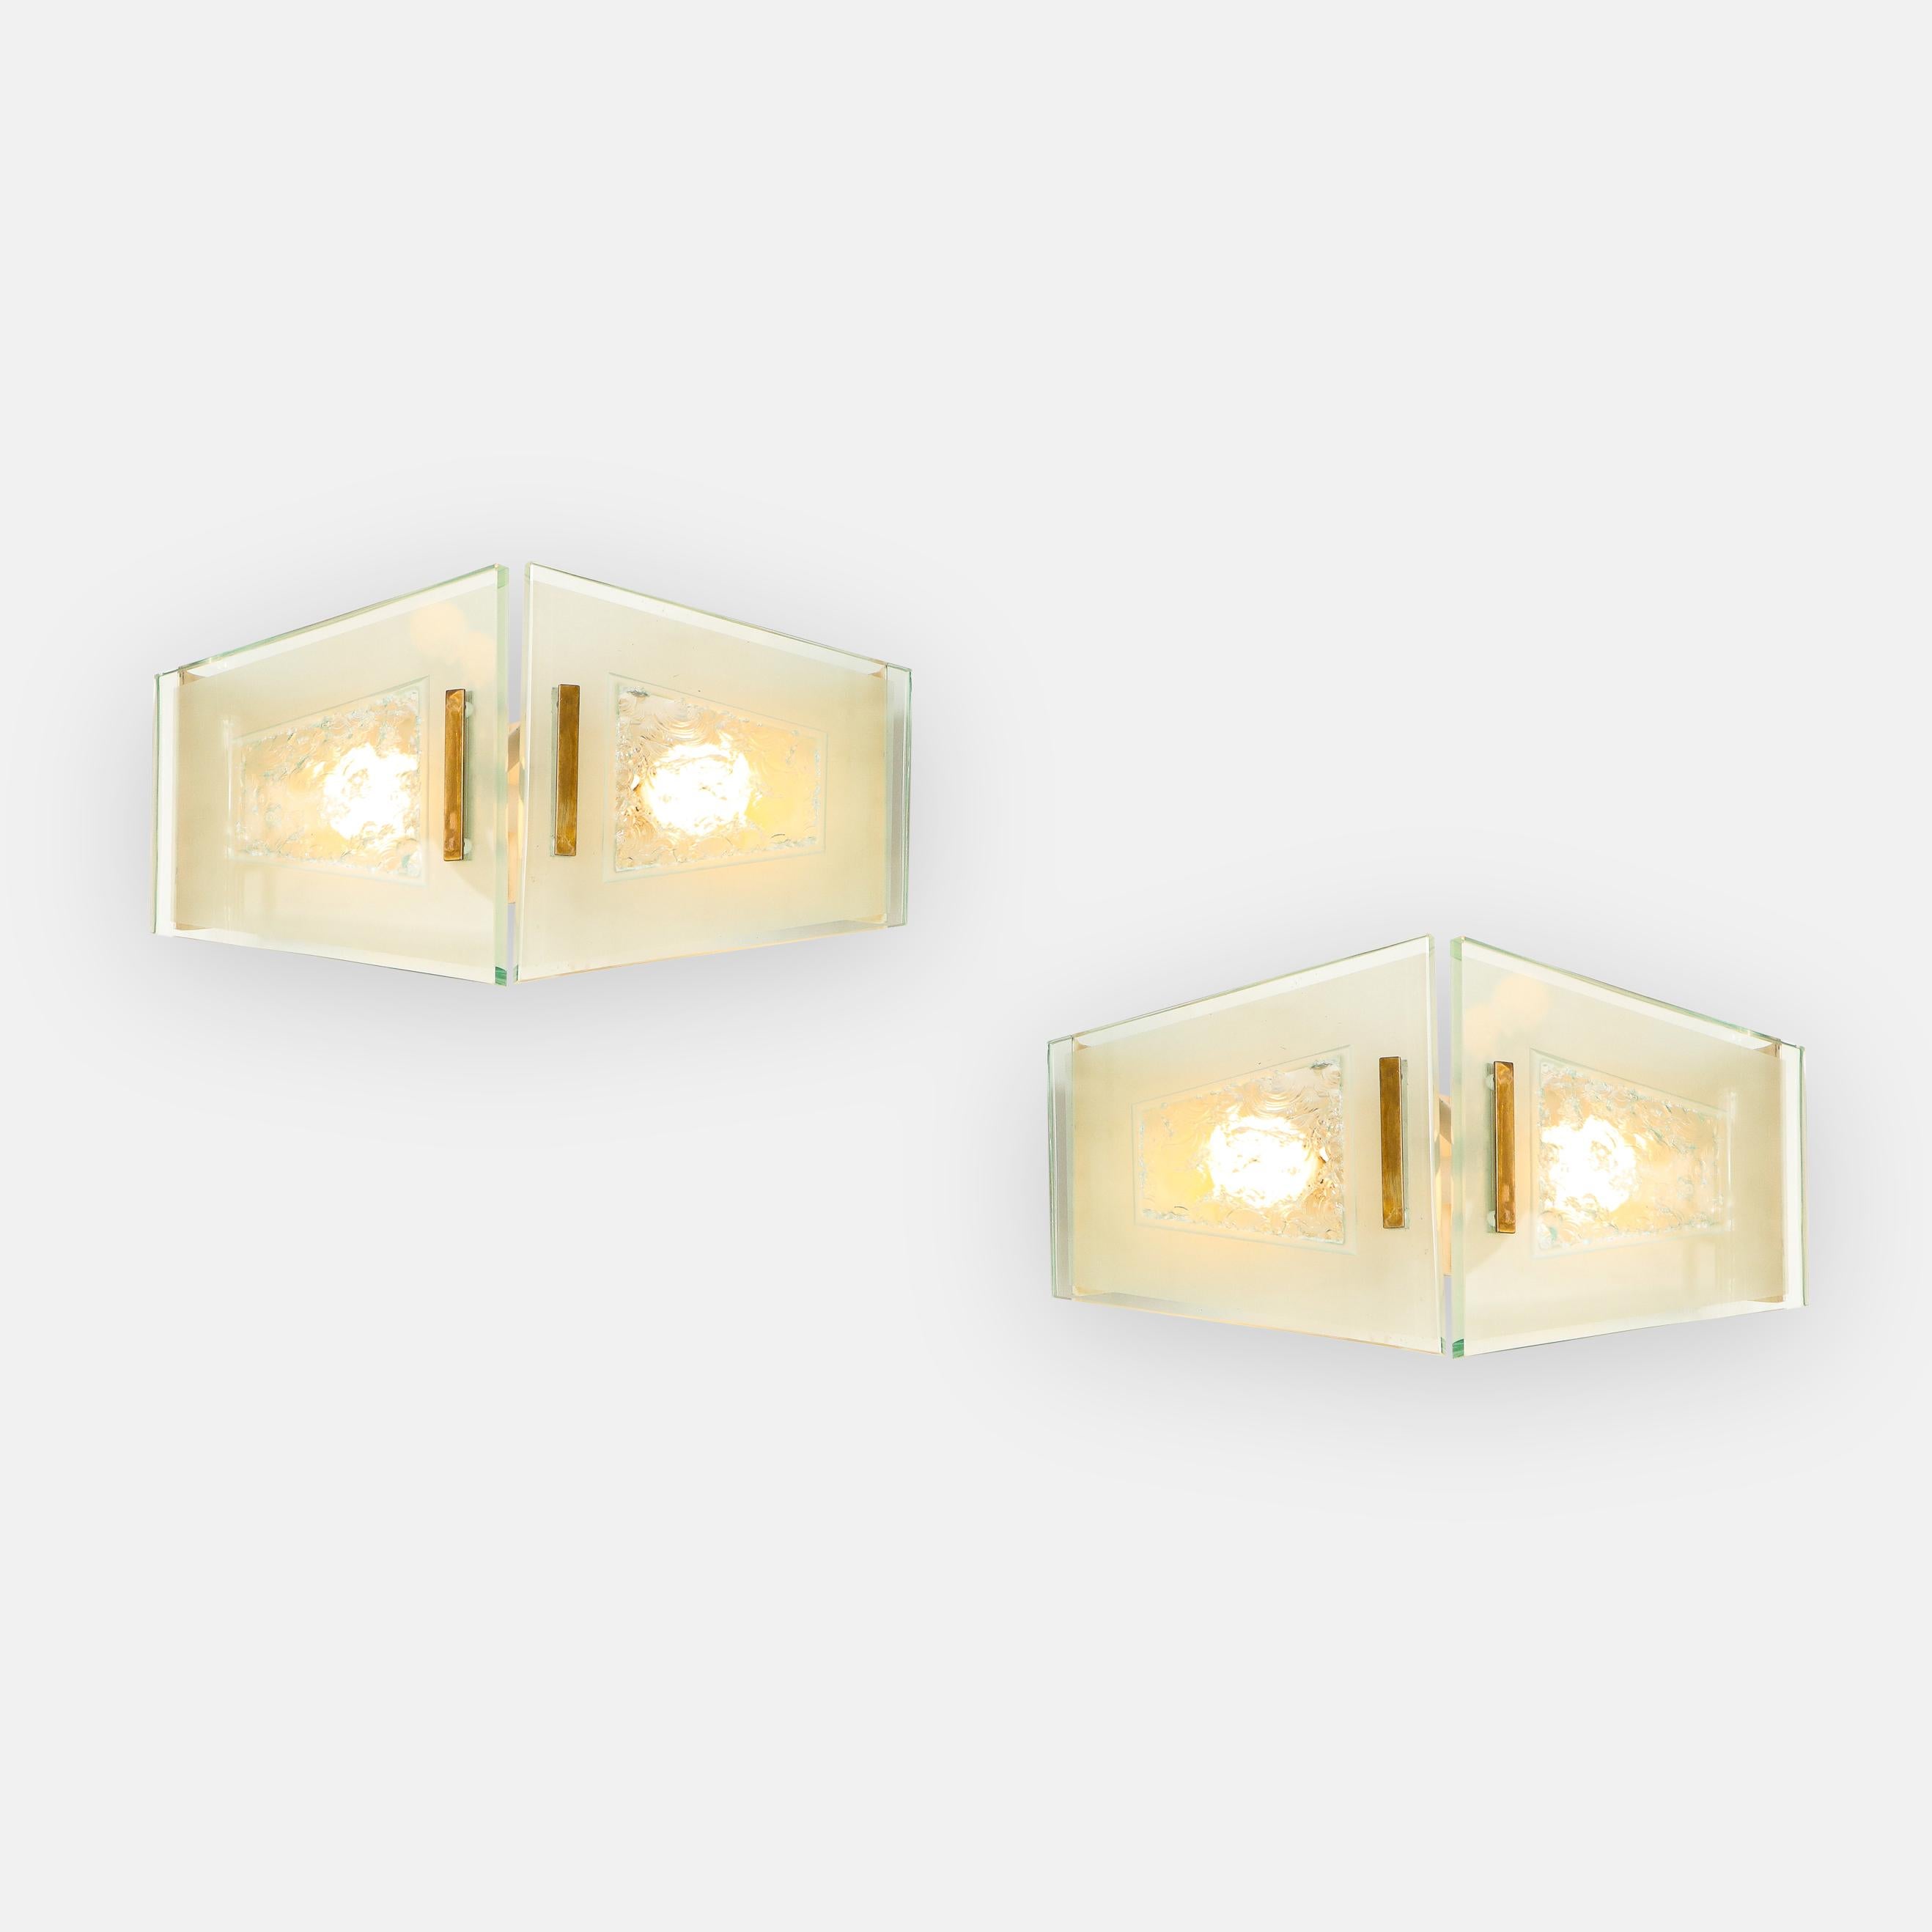 Max Ingrand for Fontana Arte rare pairs or set of 4 sconces model 2373 consisting each of two plates of chiseled, opaque, and polished glass with polished brass mounts on painted aluminum backplates. 
Newly rewired to U.S. standards including UL